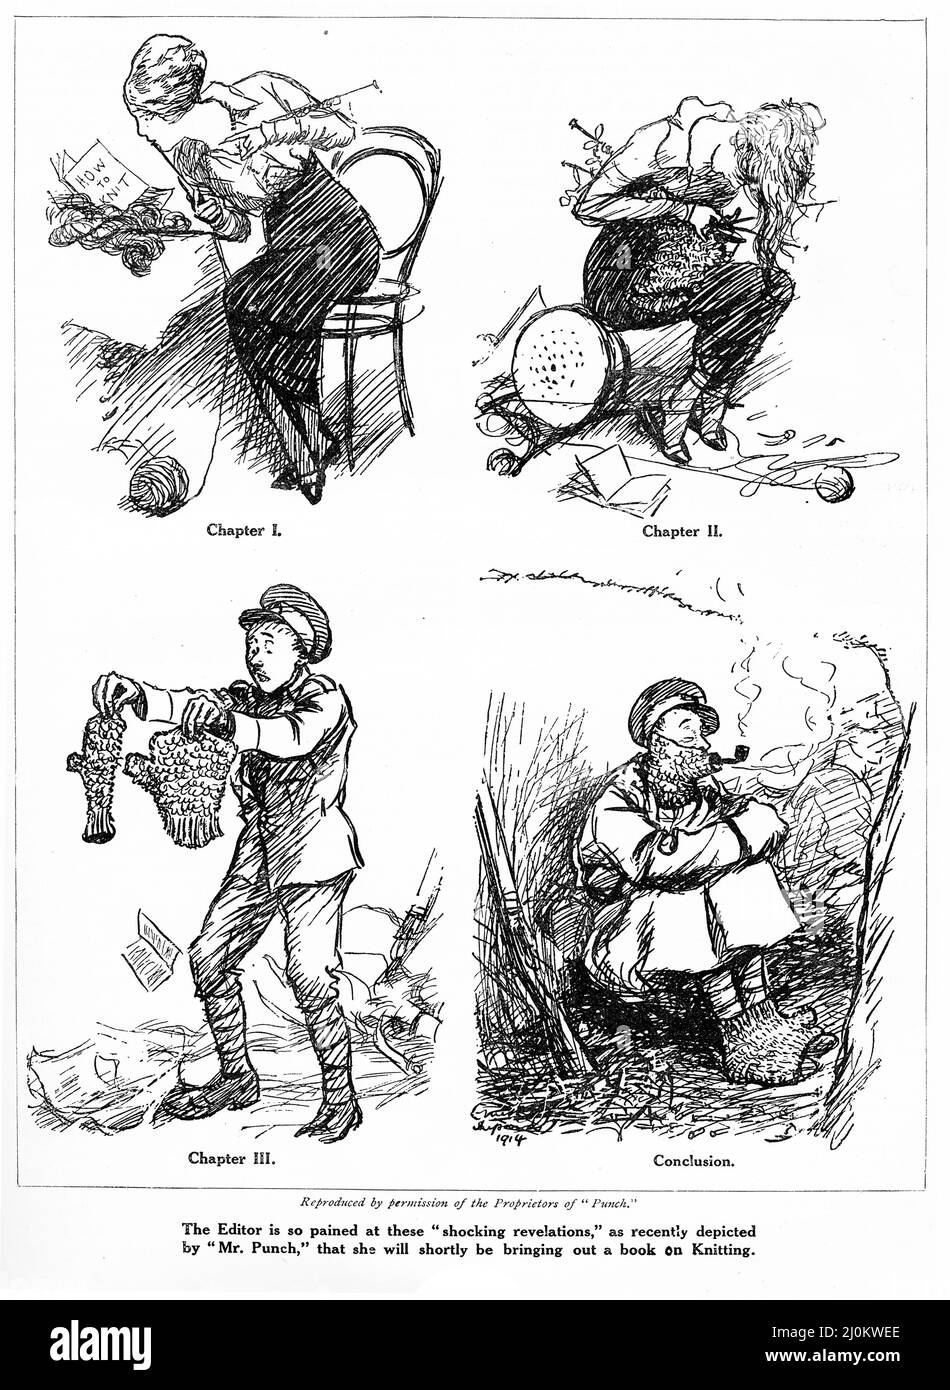 Engraving of the ladies' knitting efforts during World War One. From Punch magazine, and reproduced in a woman's journal with the note that the editor is going to publish a book on knitting. Stock Photo